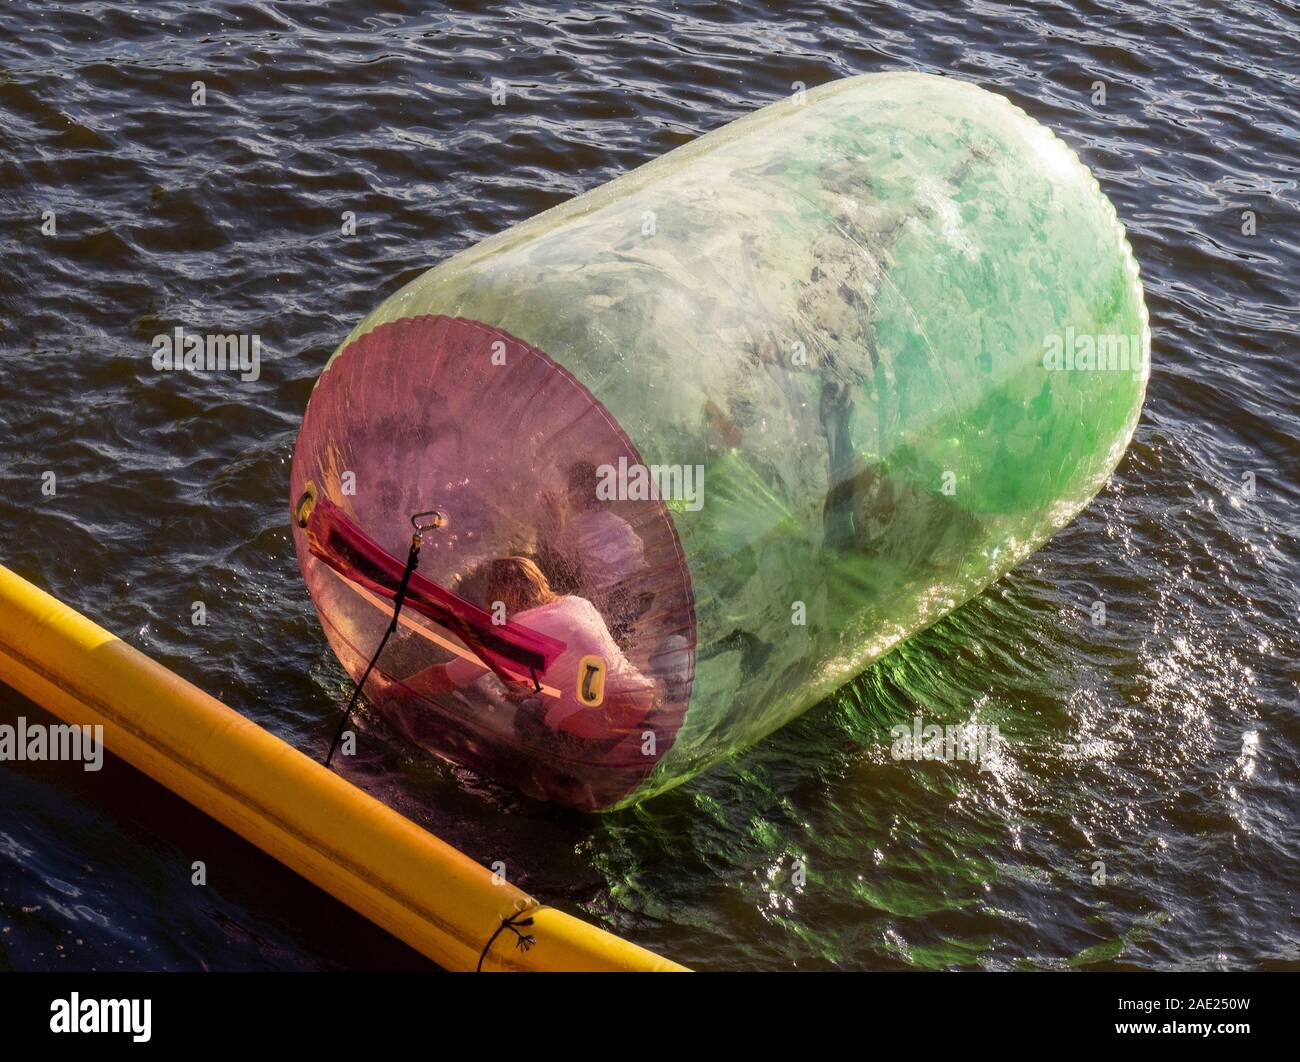 People in a inflatable cylindrical water ball zorbing in the Vltava River Prague Czech Republic. Stock Photo